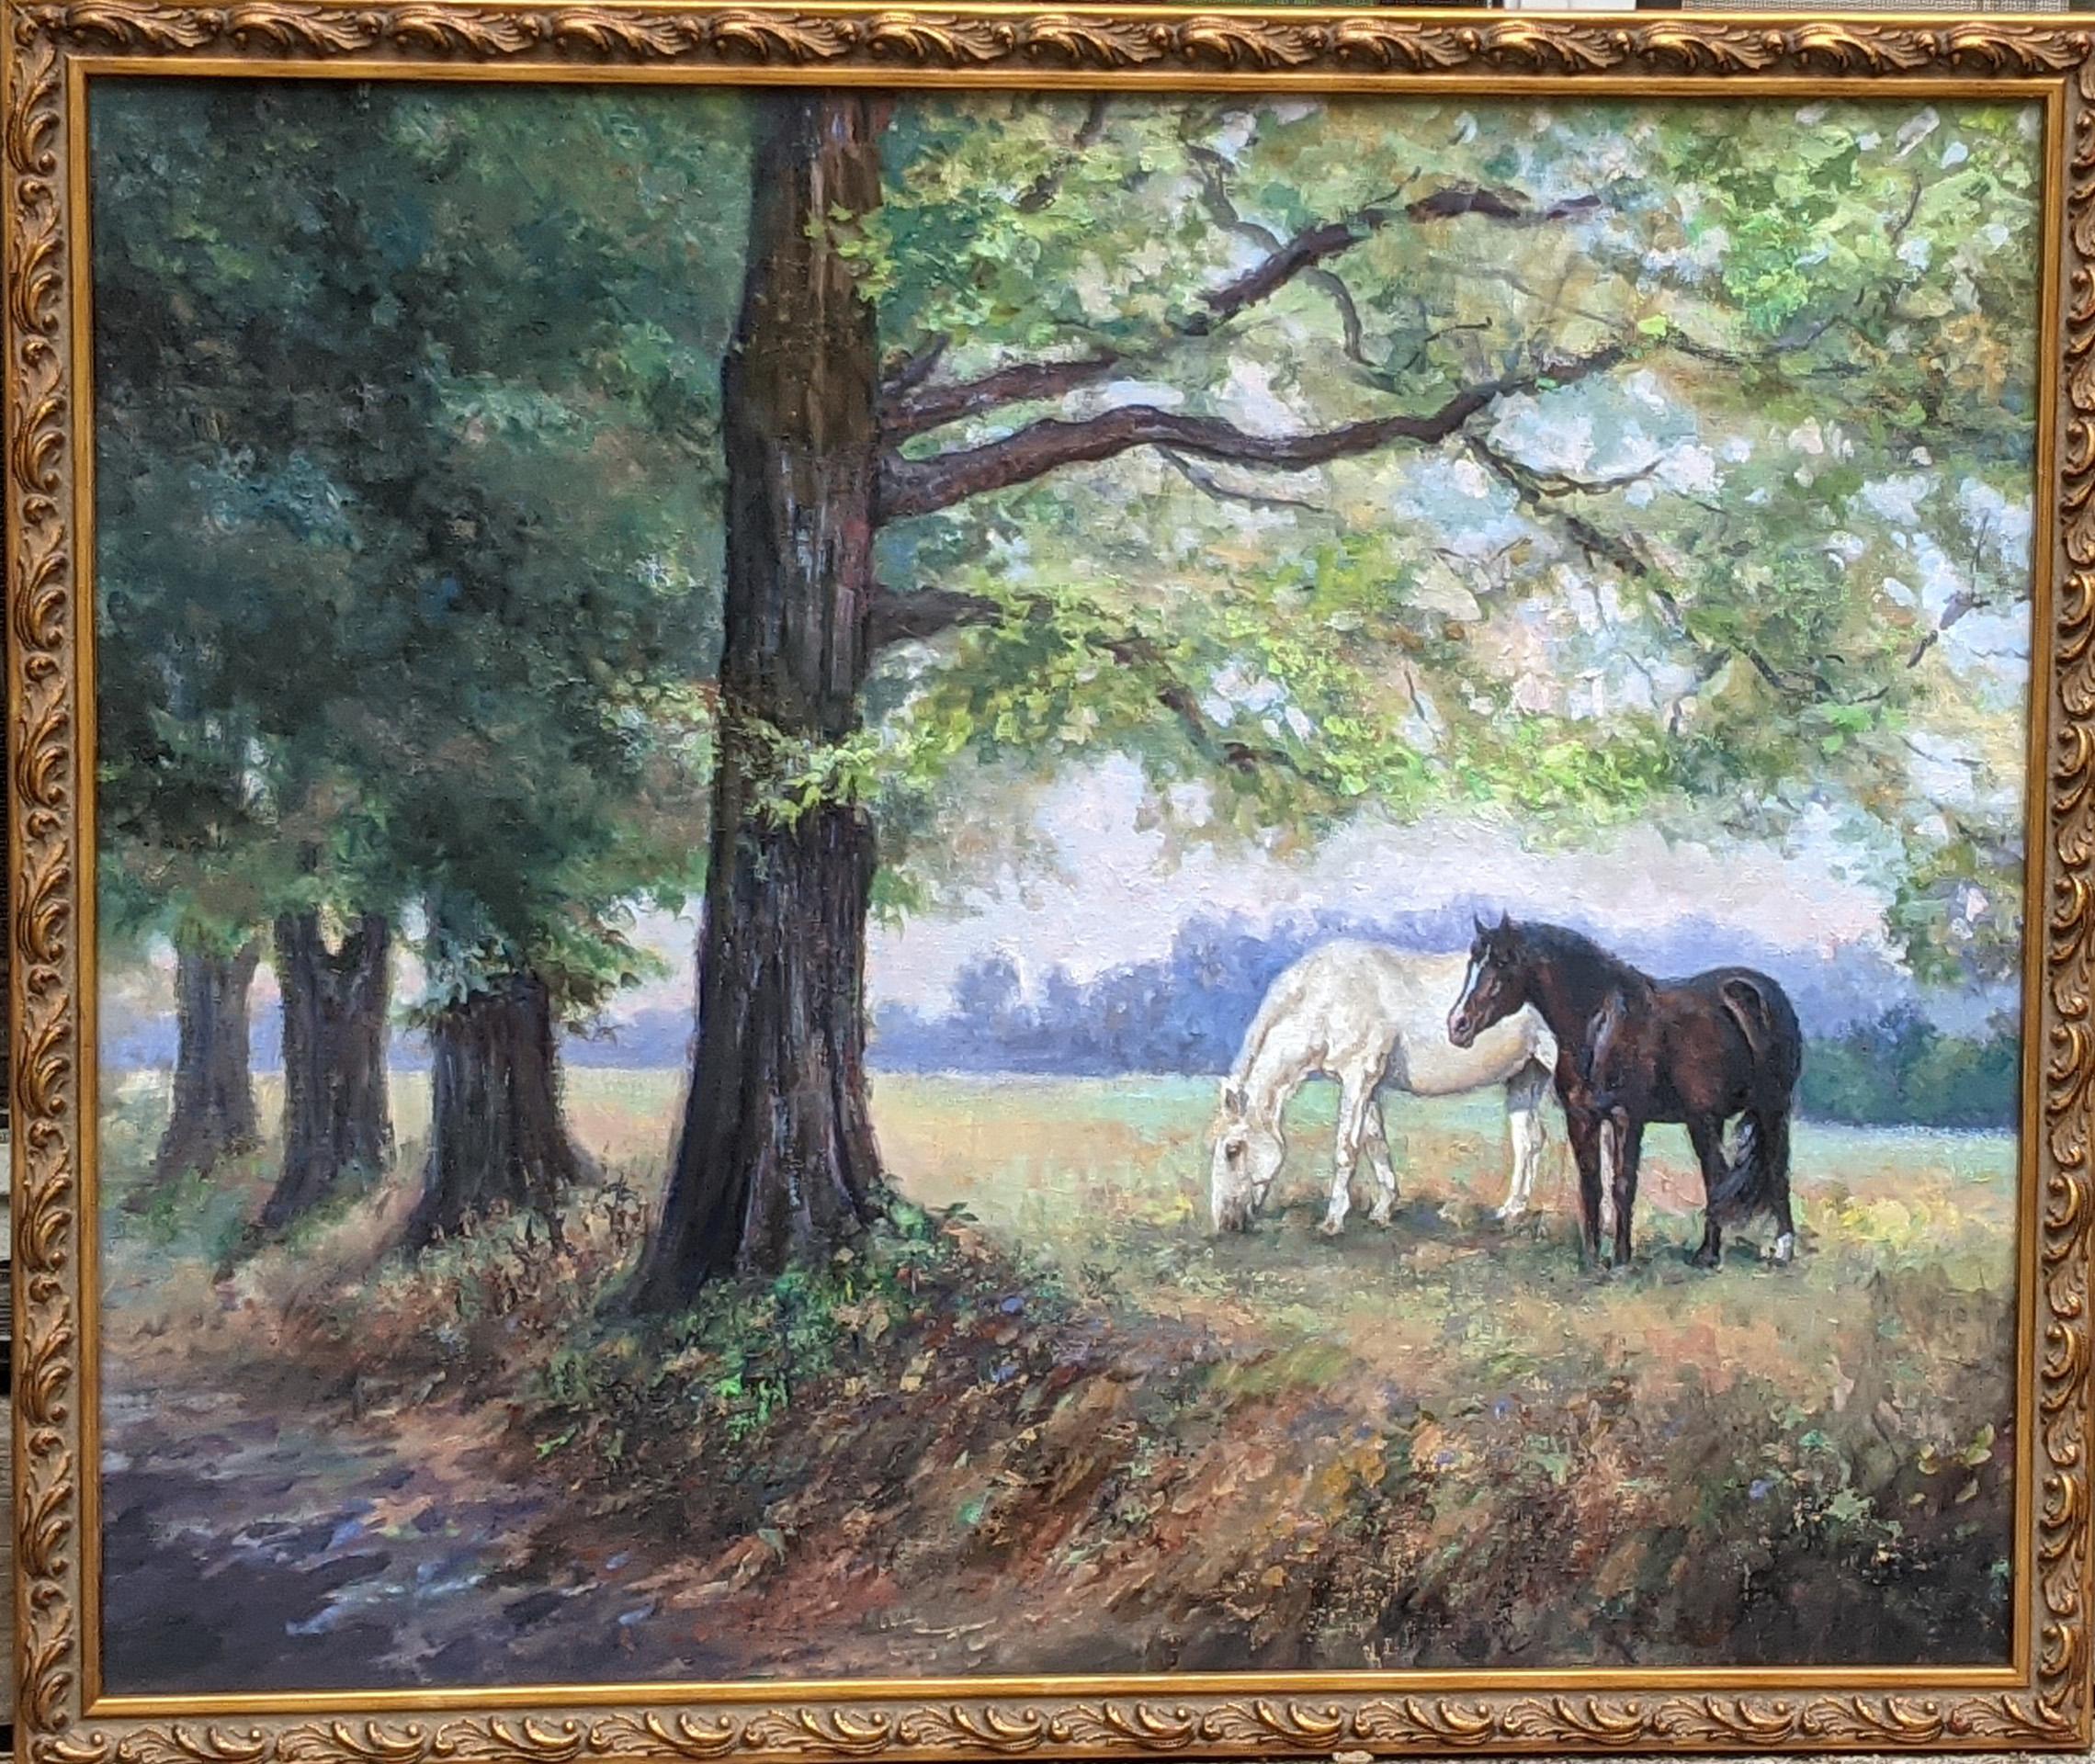 Beth Carlson has done it again with her horse painting “Under the Maples” her astonishingly accurate depiction of her beloved horses are just as beautiful as the lovely landscape with stately maple trees.  A carefully created landscape painting plus